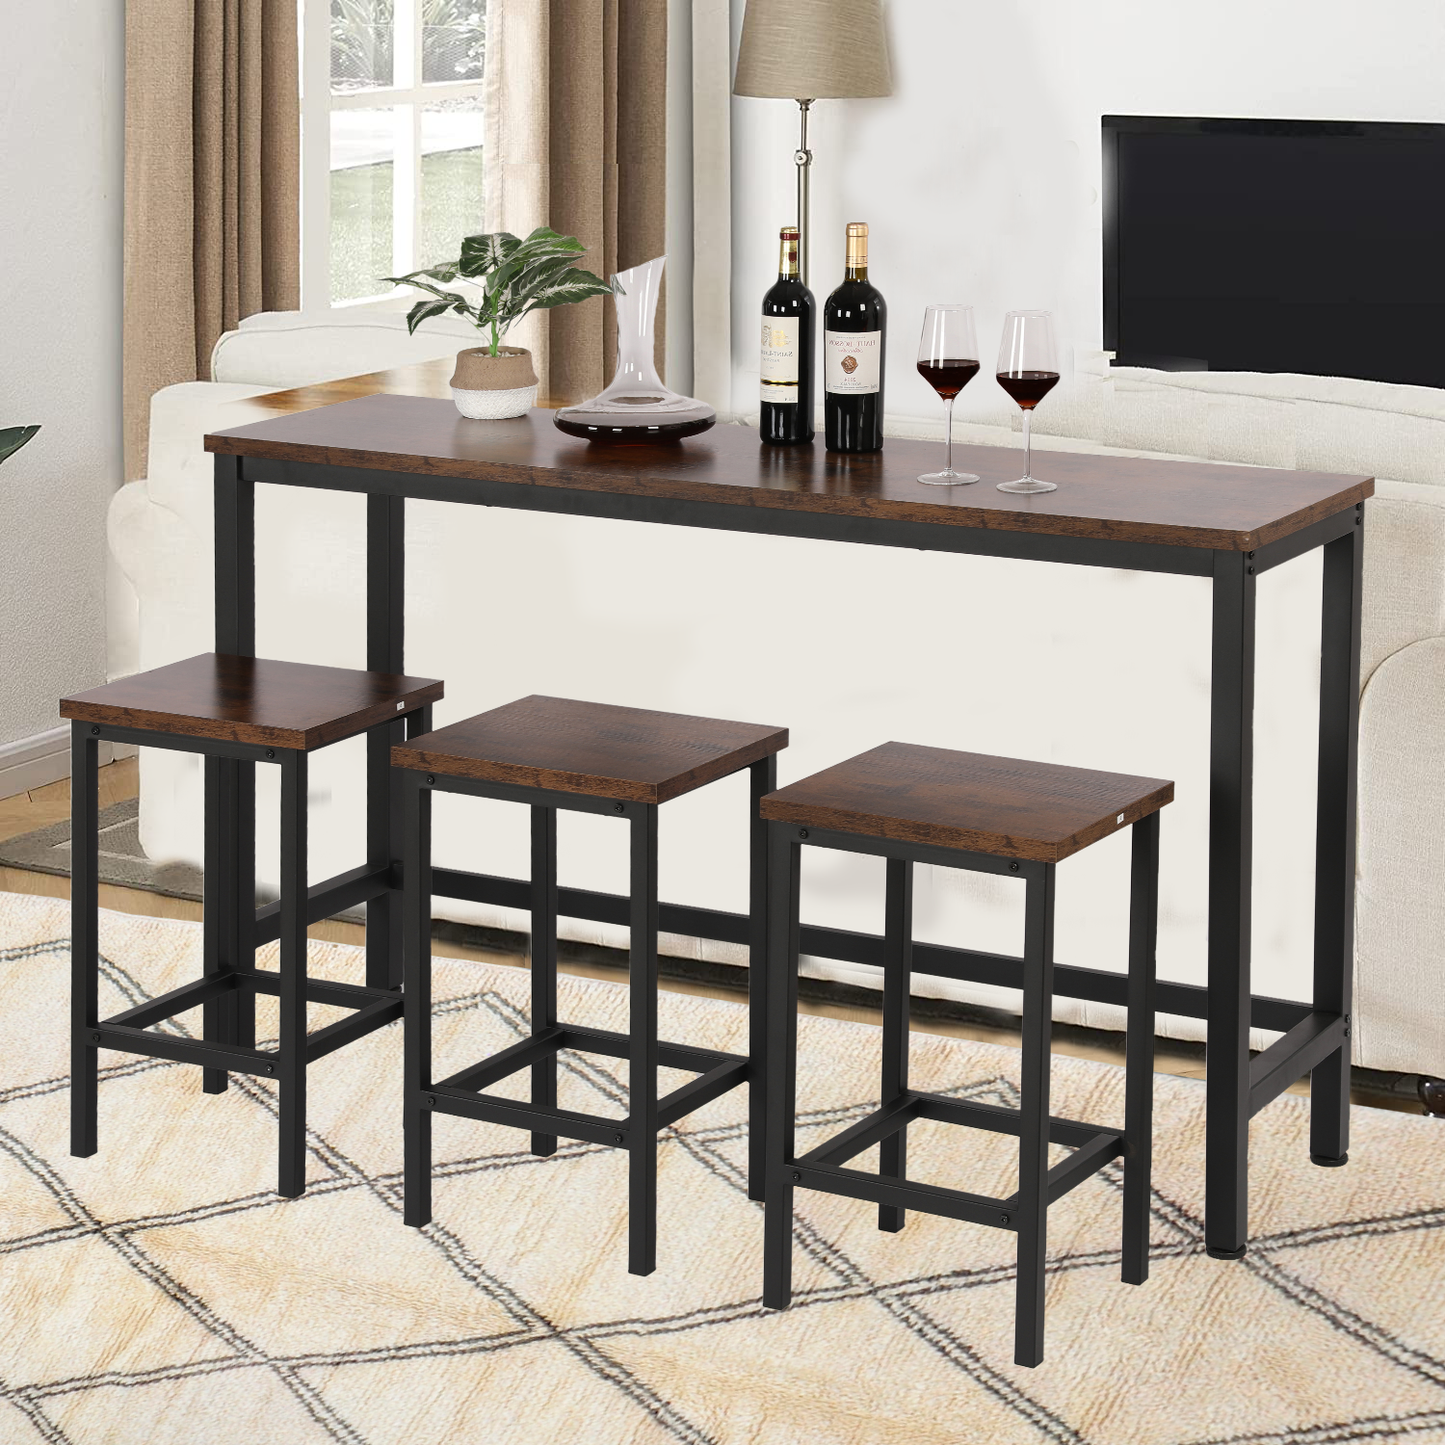 SYNGAR 4-Piece Counter Height Dining Set, Long Pub Table and 3 Stools Set, Modern Bar Table Set for 3, Home Kitchen Breakfast Dining Table Set, Fits for Dining Room, Restaurant, Brown, D6415